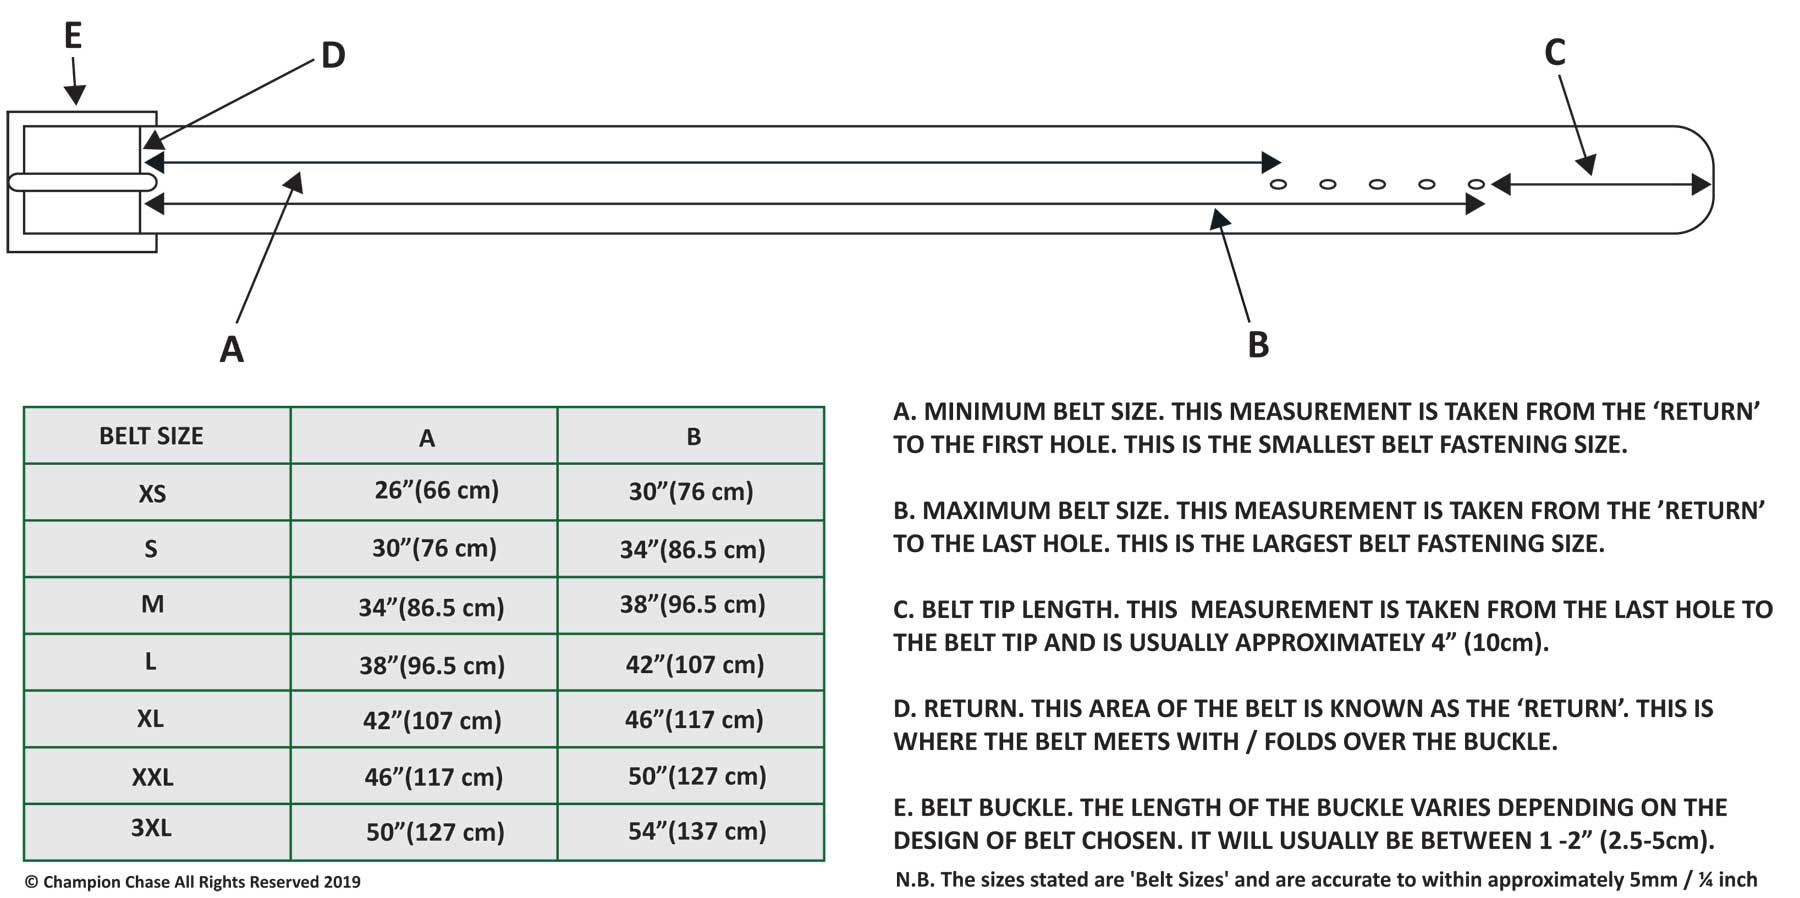 Champion Chase Belt Diagram Size Guide